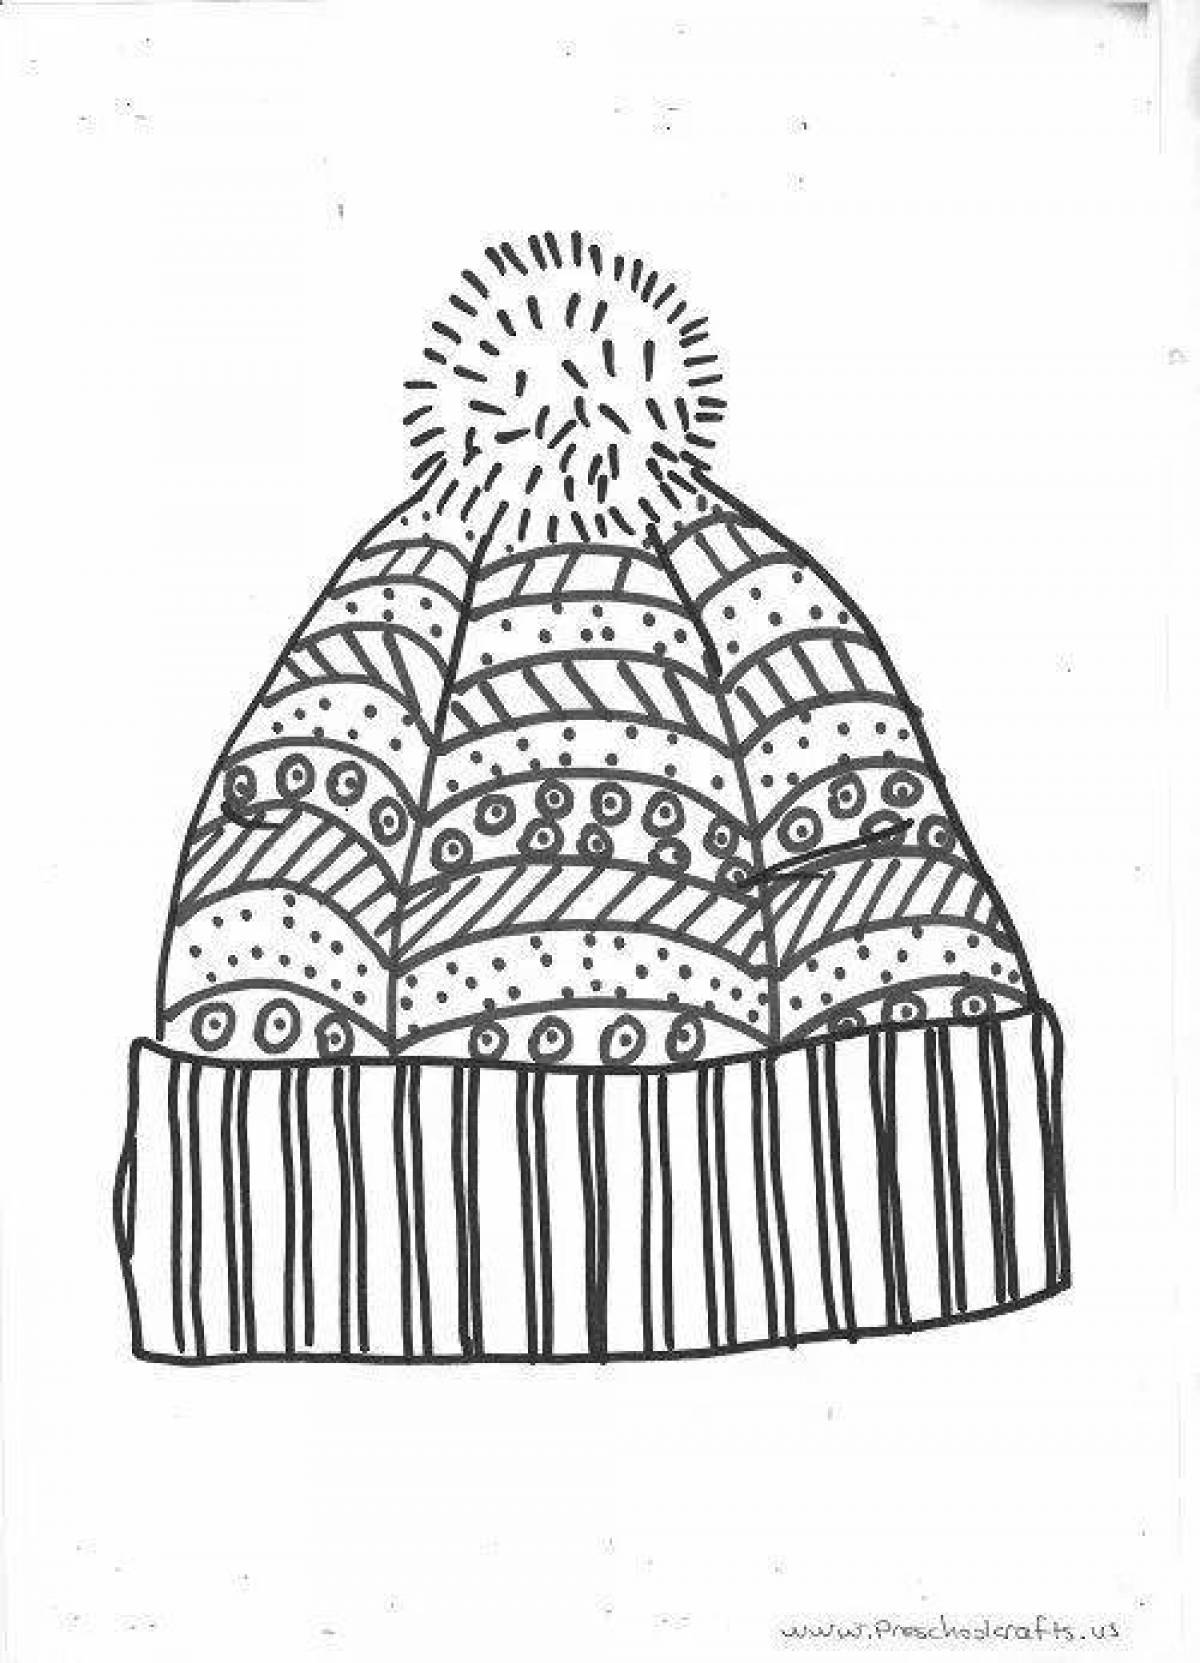 Shiny winter hat coloring book for kids